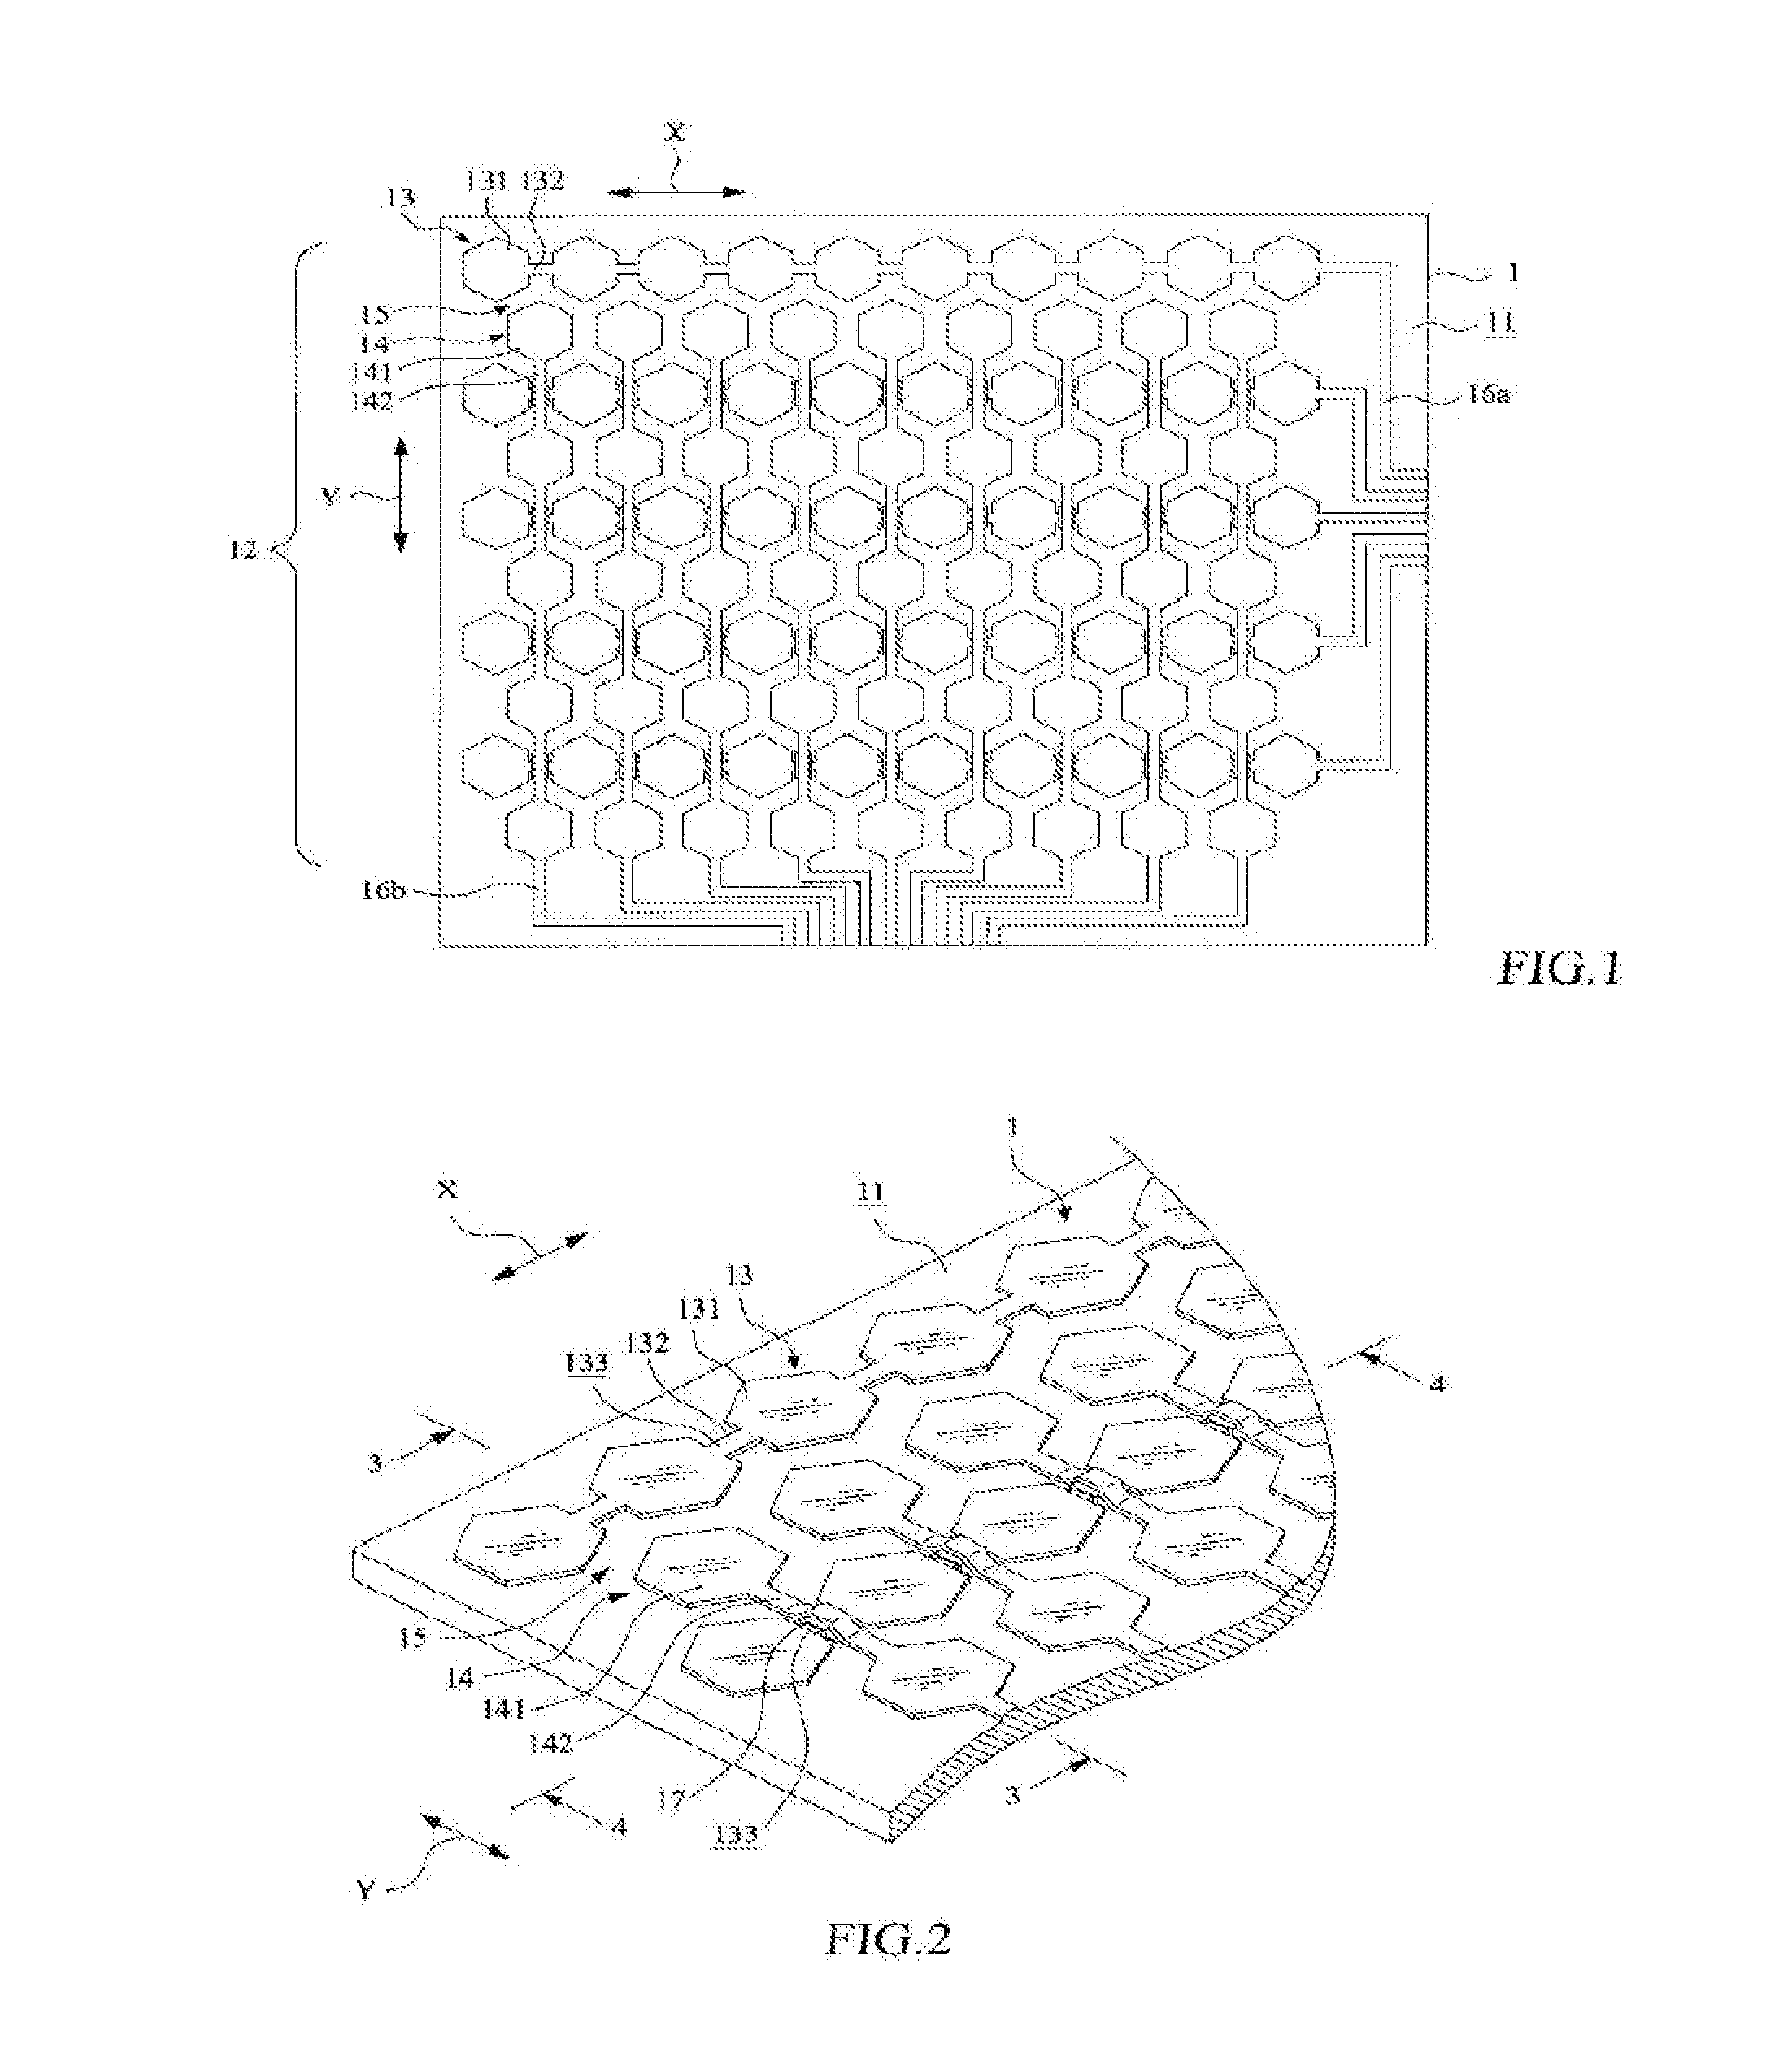 Conductor pattern structure of capacitive touch panel